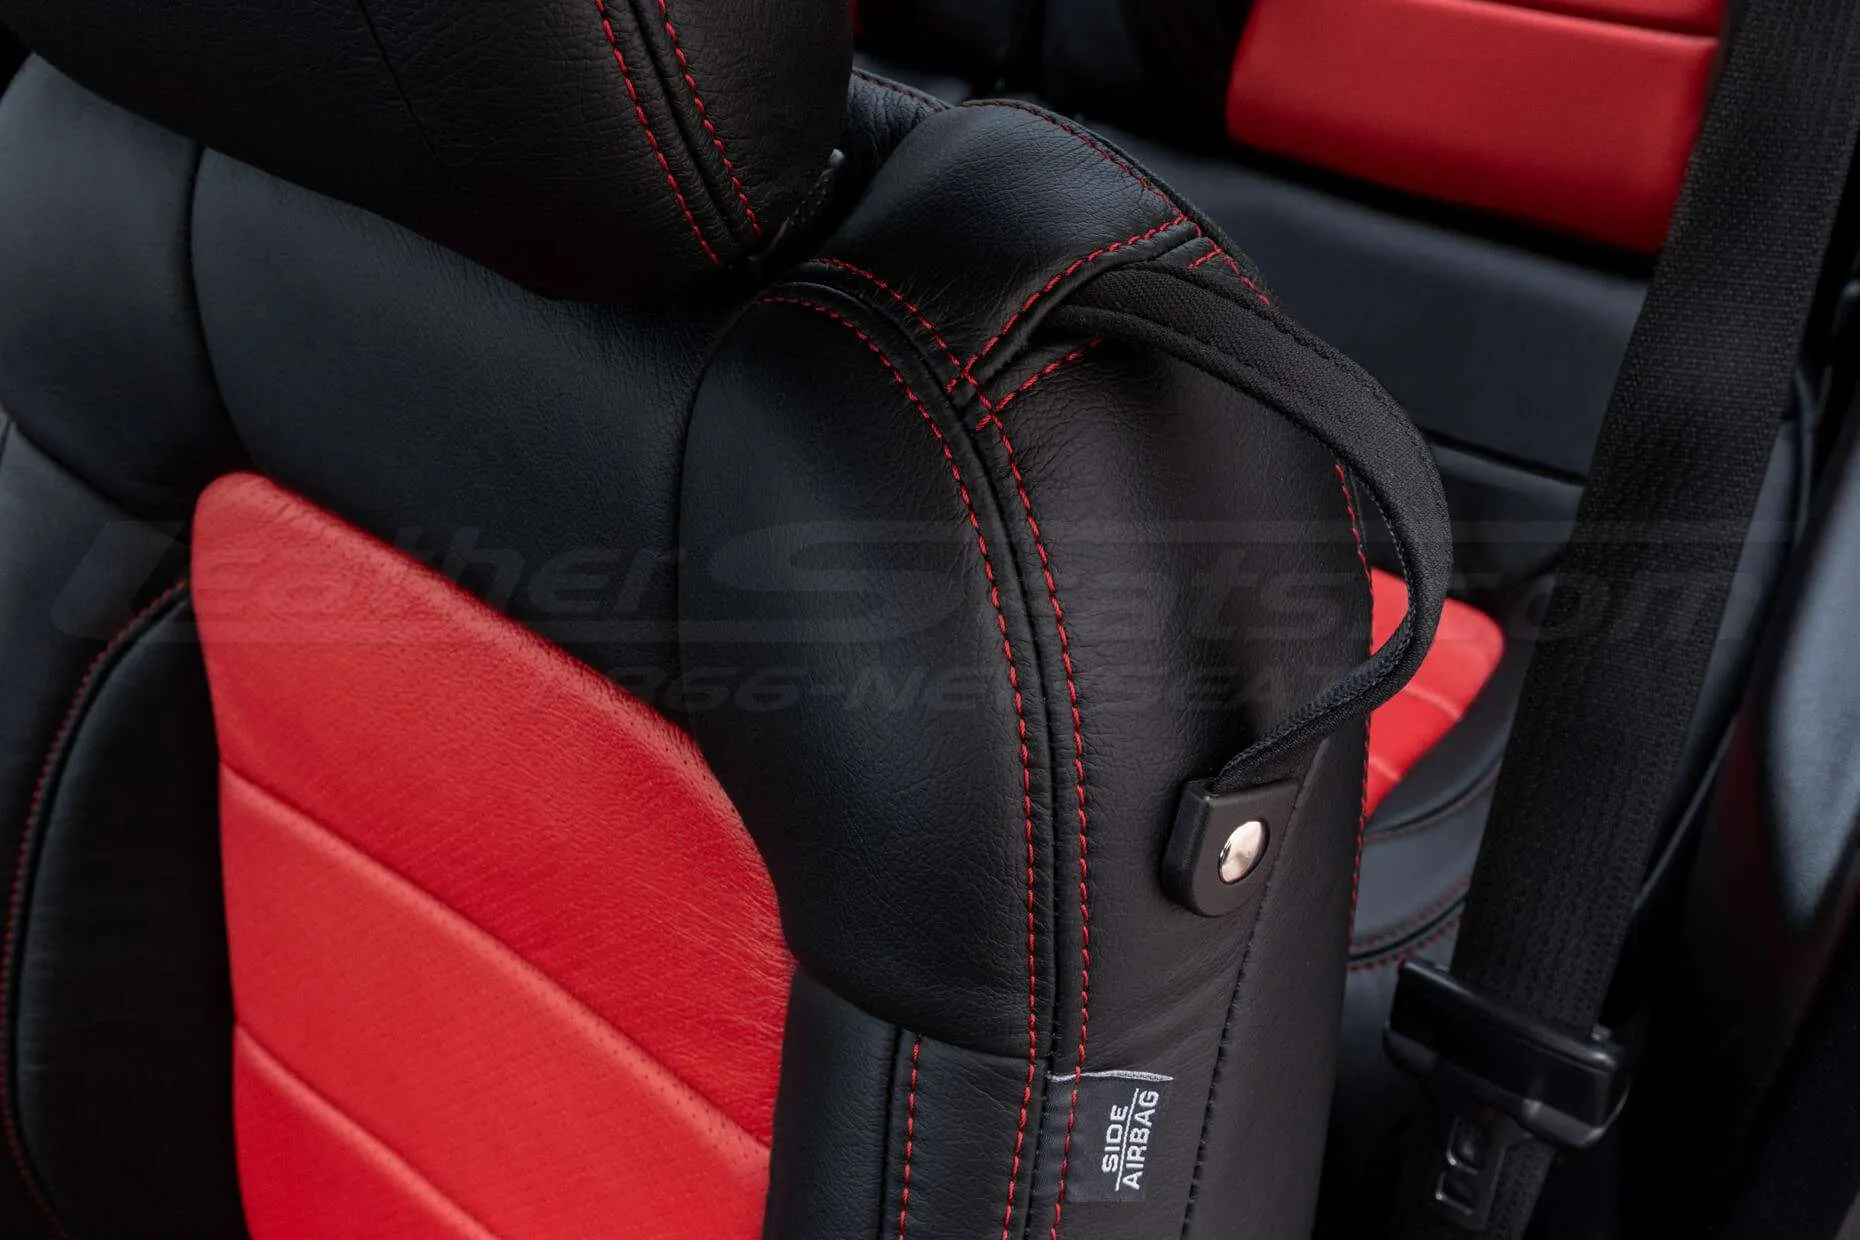 Ford Mustang installed leather kit - Black & Bright Red - Bright Red double-stitching and airbag tag